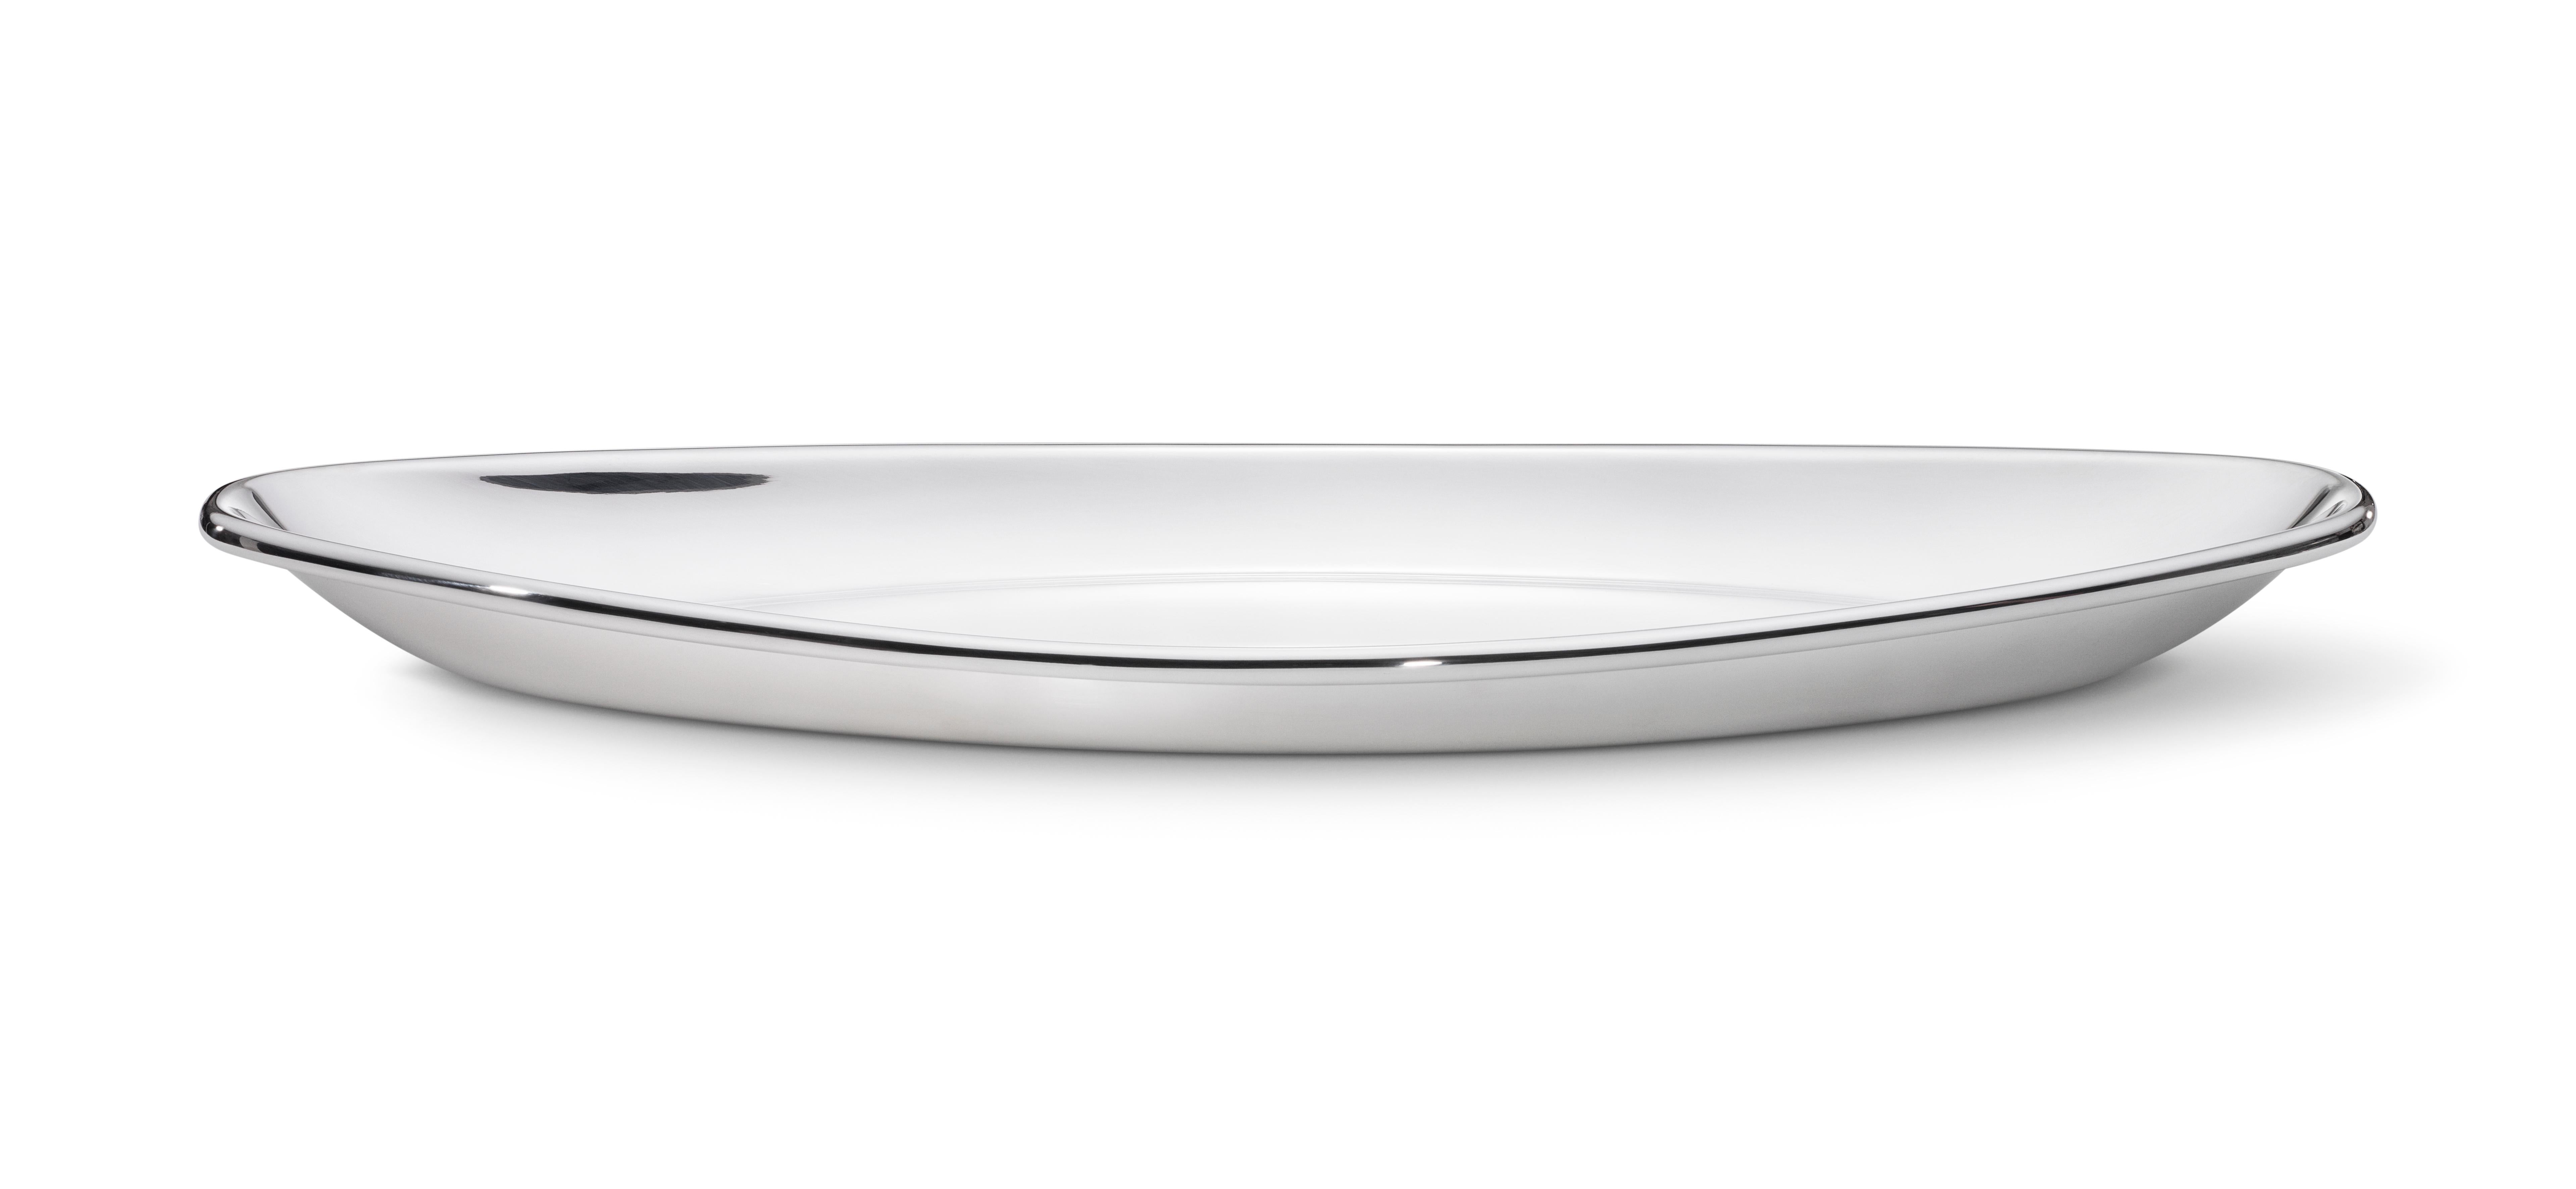 Stunning Koppel fish dish constructed in clean lines, this pieces exudes warmth, tempering the strict rules of functionalism with organic, lifelike shapes. Today, Koppel’s precise curves are considered among this century’s best silver works.
  